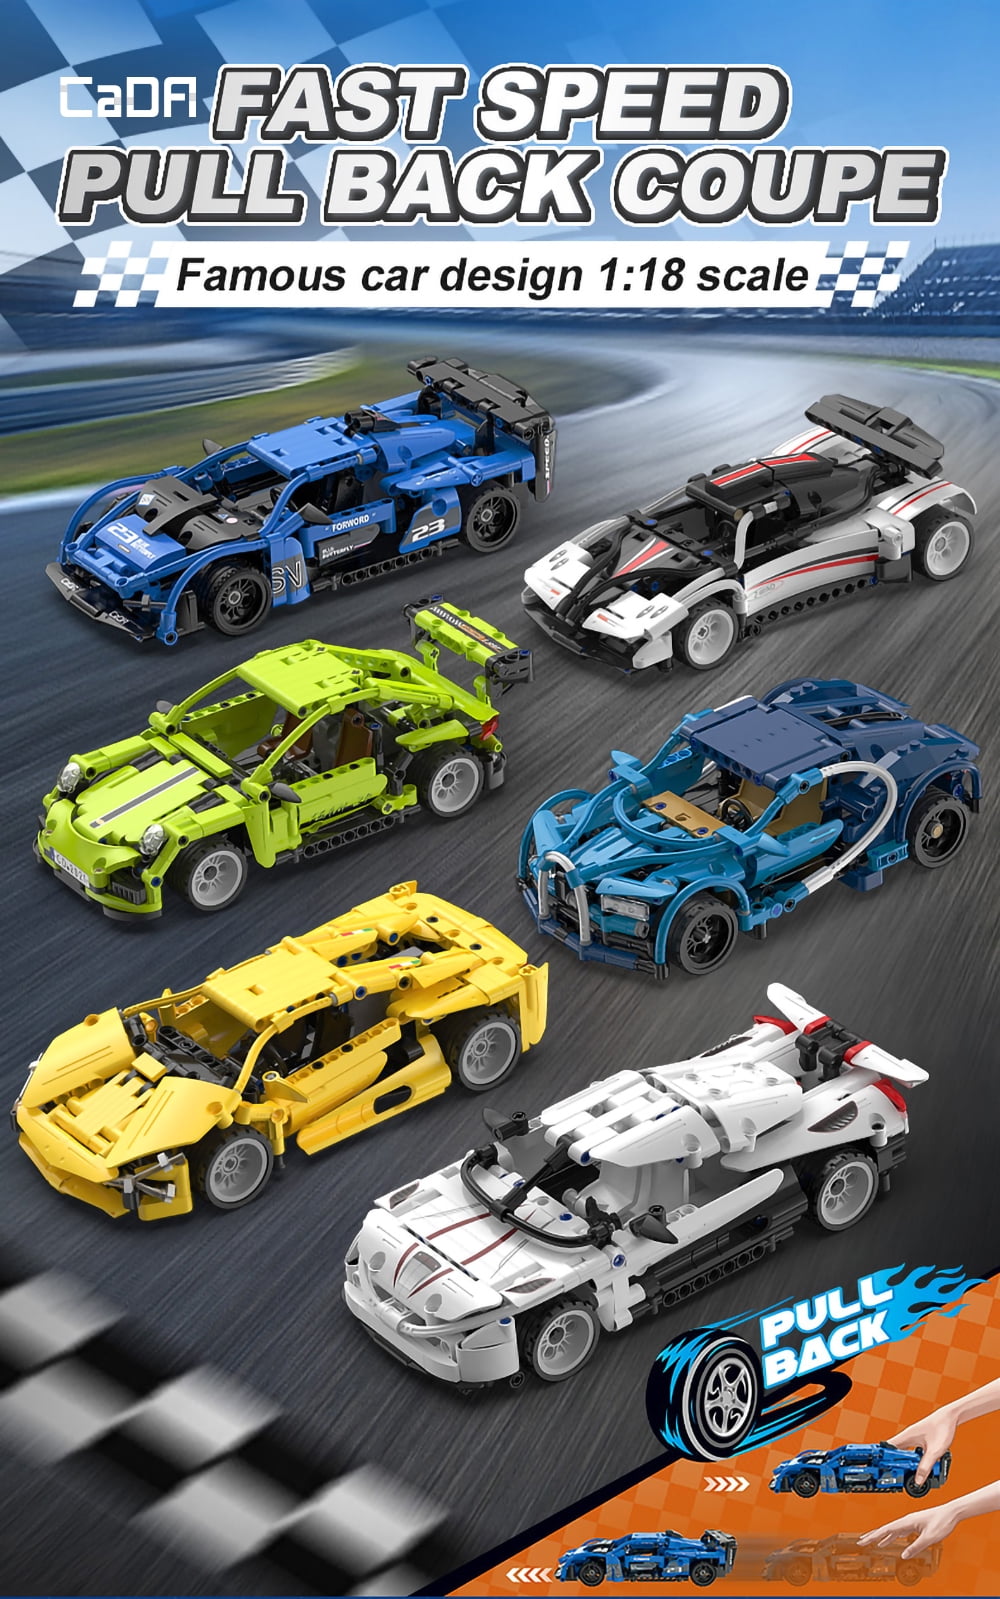 CADA Race Car Building Toys - Pull Back 368Pcs Apocalypse Sport Car  Building Brick Kit for 6 7 8 9 10 + Years Old Boys Kids Birthday Gifts,  STEM Toy